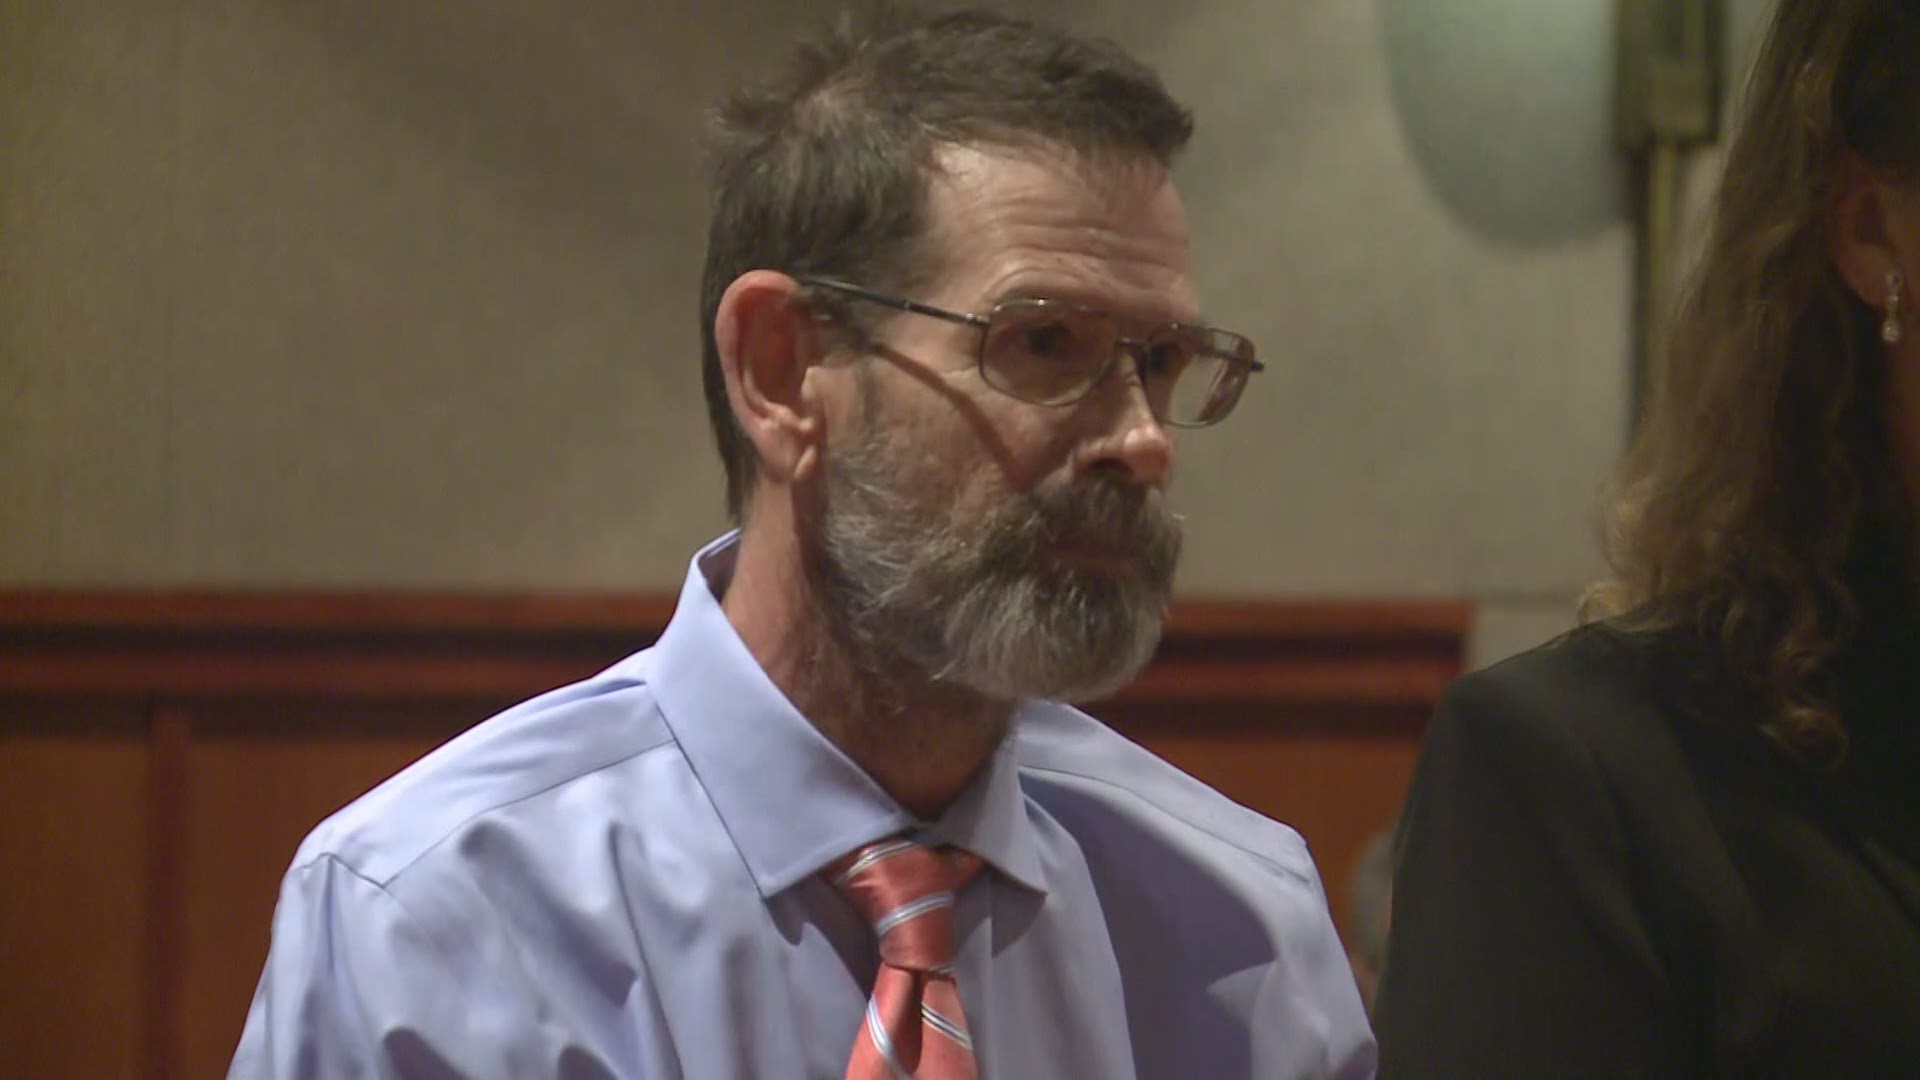 Gregory Vance, 61 pleaded not guilty Wednesday to the strangulation death of his girlfriend, Patricia Grassi.